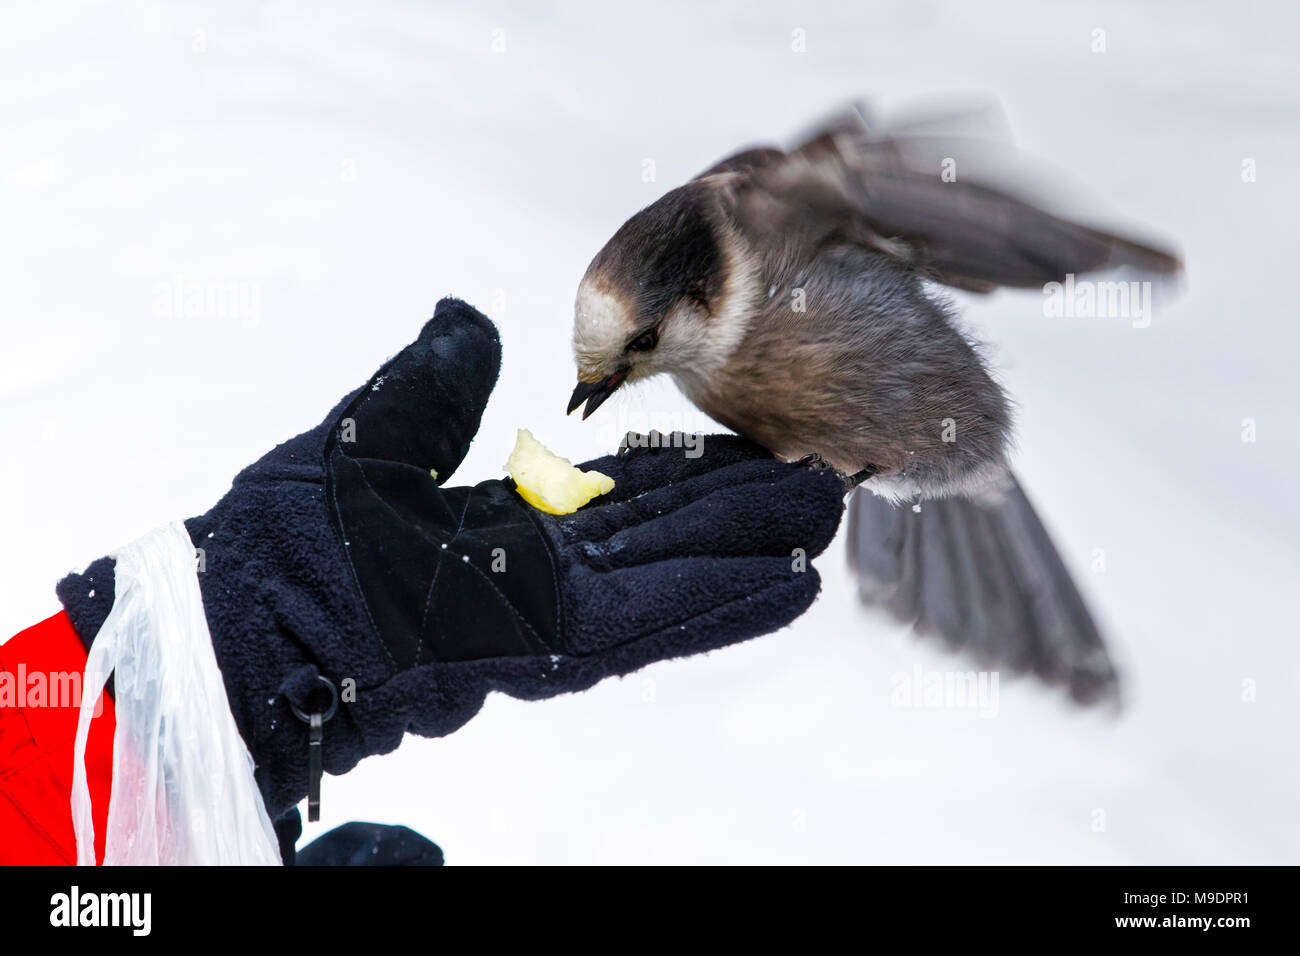 43,118.09134 close-up of Gray Jay, Canada jay flapping its wings and eating out of a woman’s gloved hand while she feeds the bird Stock Photo